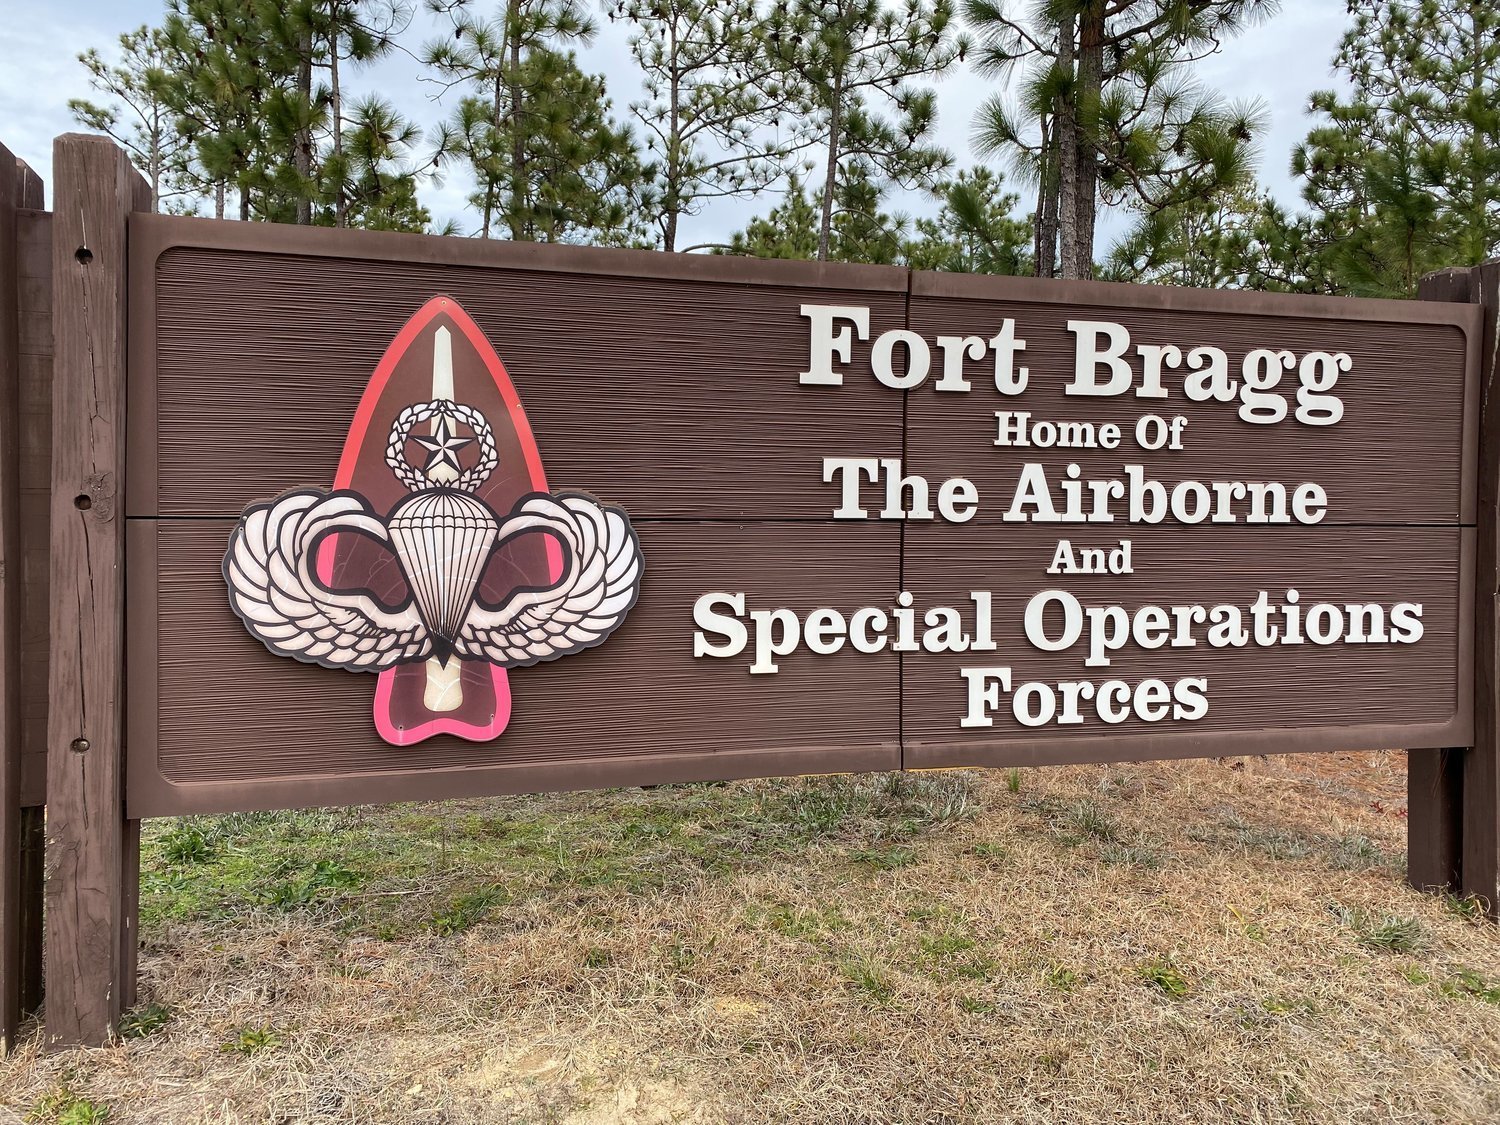 Military officials are investigating after a Fort Bragg soldier was killed Friday morning after being struck by a vehicle while crossing the intersection at Knox and Honeycutt streets.